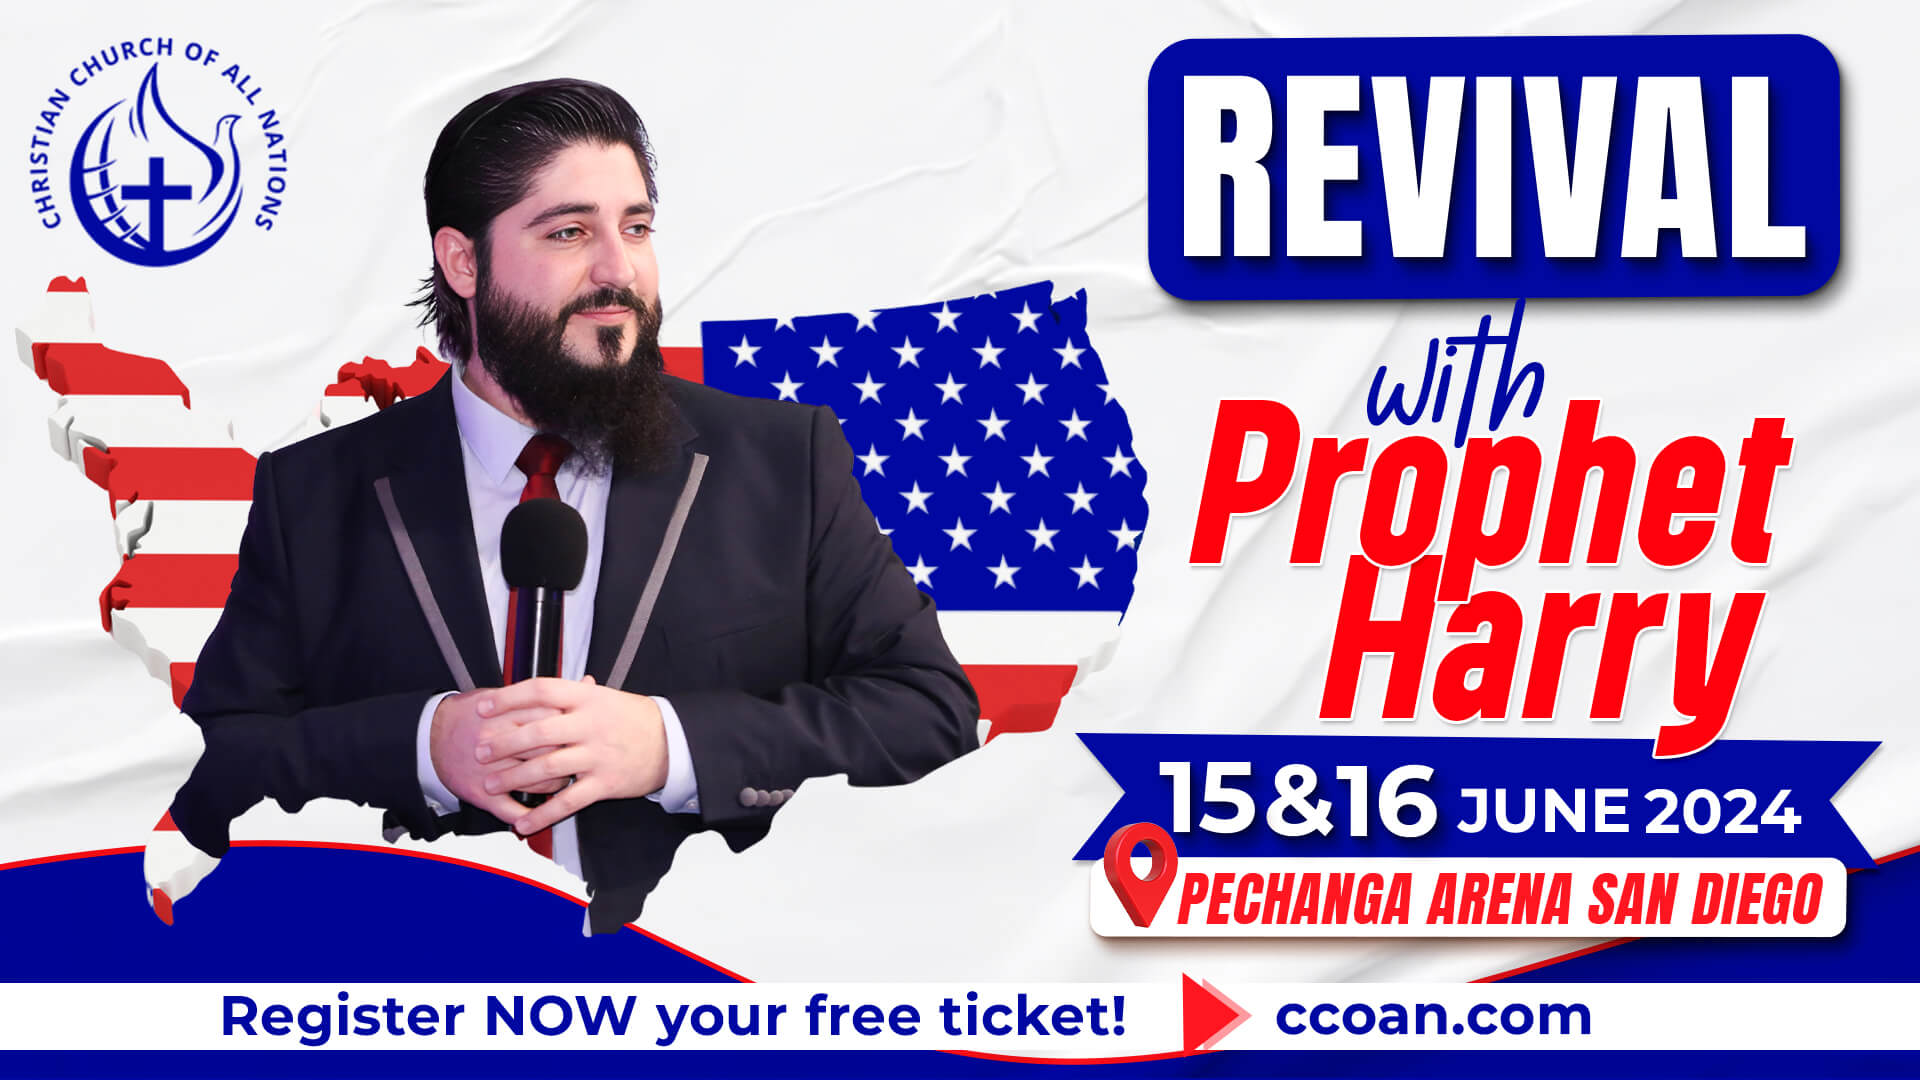 SAN DIEGO – USA REVIVAL WITH PROPHET HARRY!